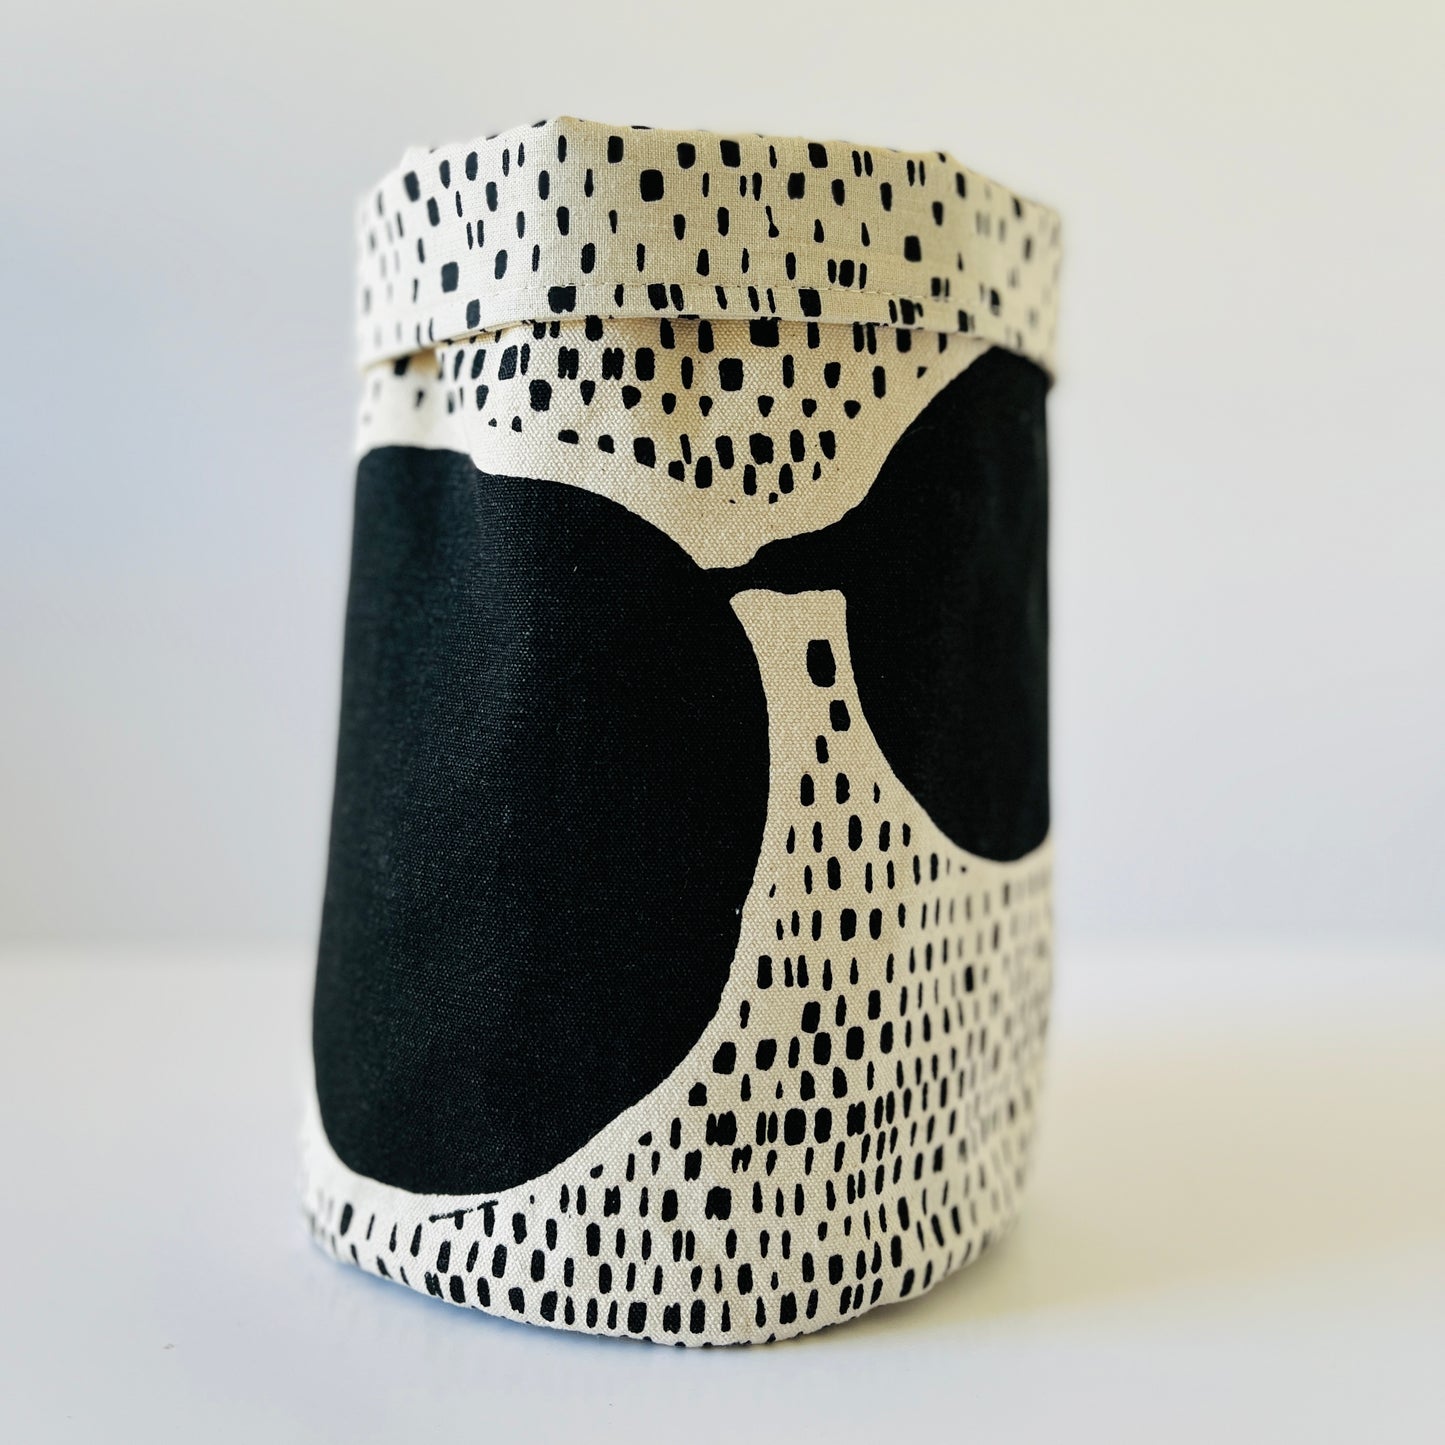 Contemporary and stylish fabric storage pots, in pure linen and hand printed in Cumbria by the very skilled and creative Kirsten Gilder. The MORSE design is graphic and modern.